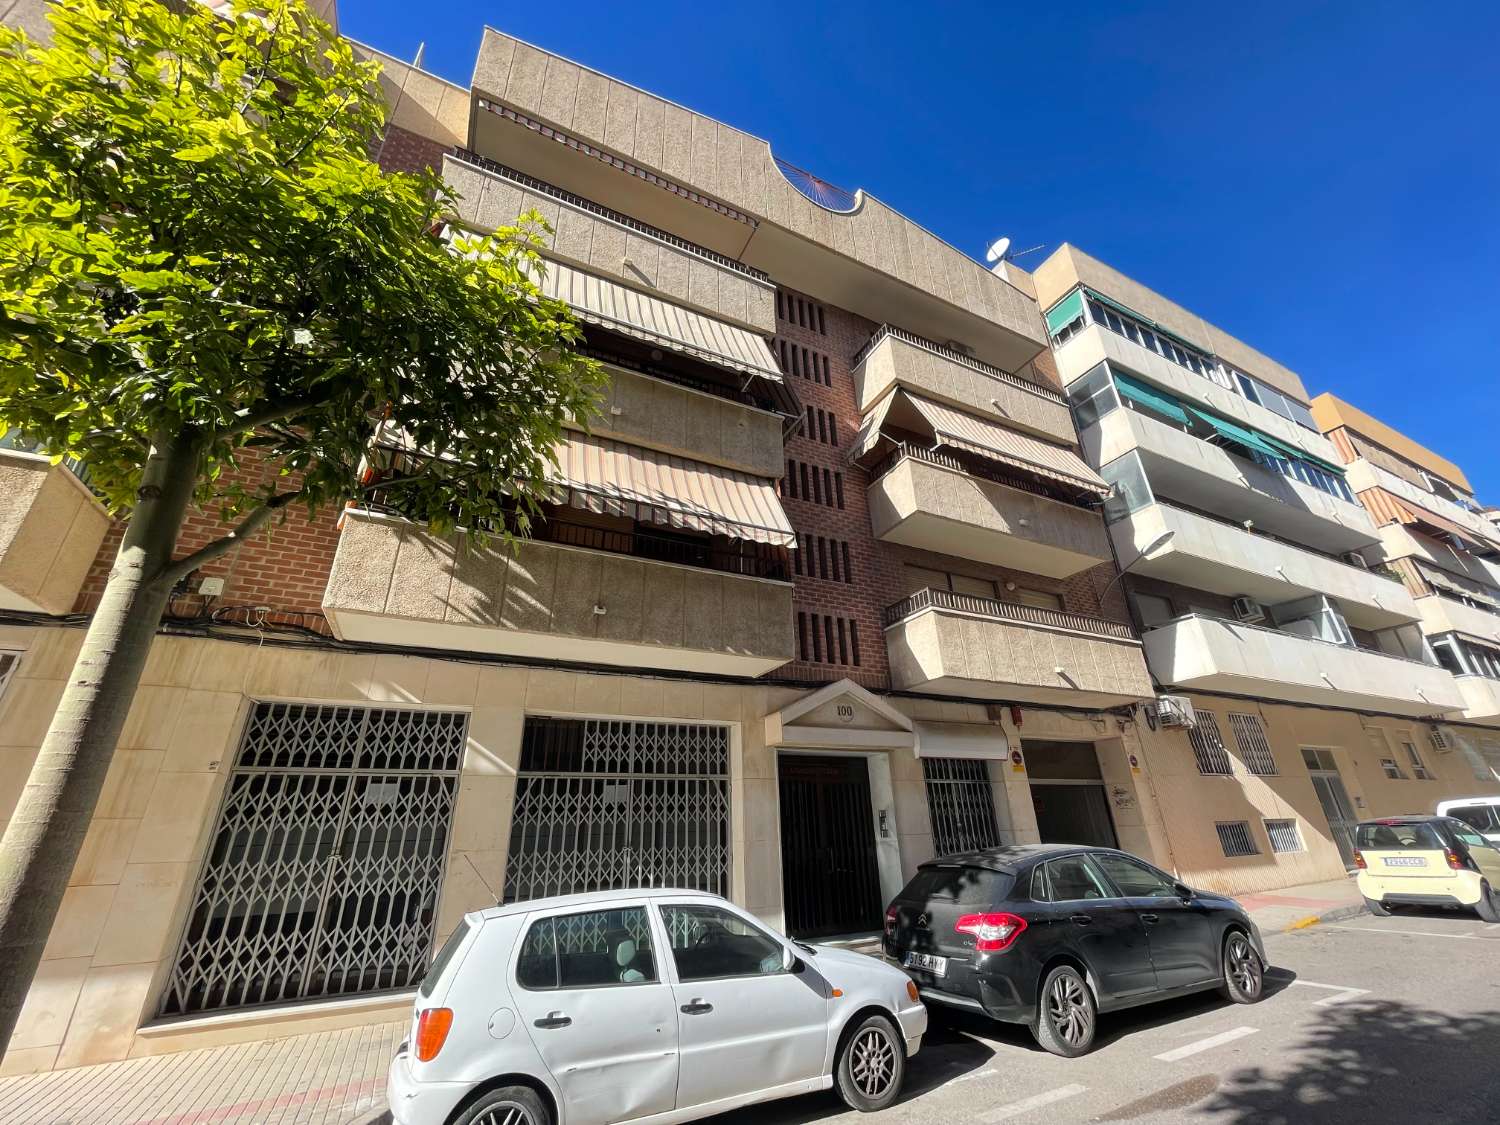 MAKE YOUR OFFER!! MUTXAMIEL APARTMENT 3 BEDROOMS TWO BATHROOMS WITH 40M2 BACKYARD TO REFORM!!